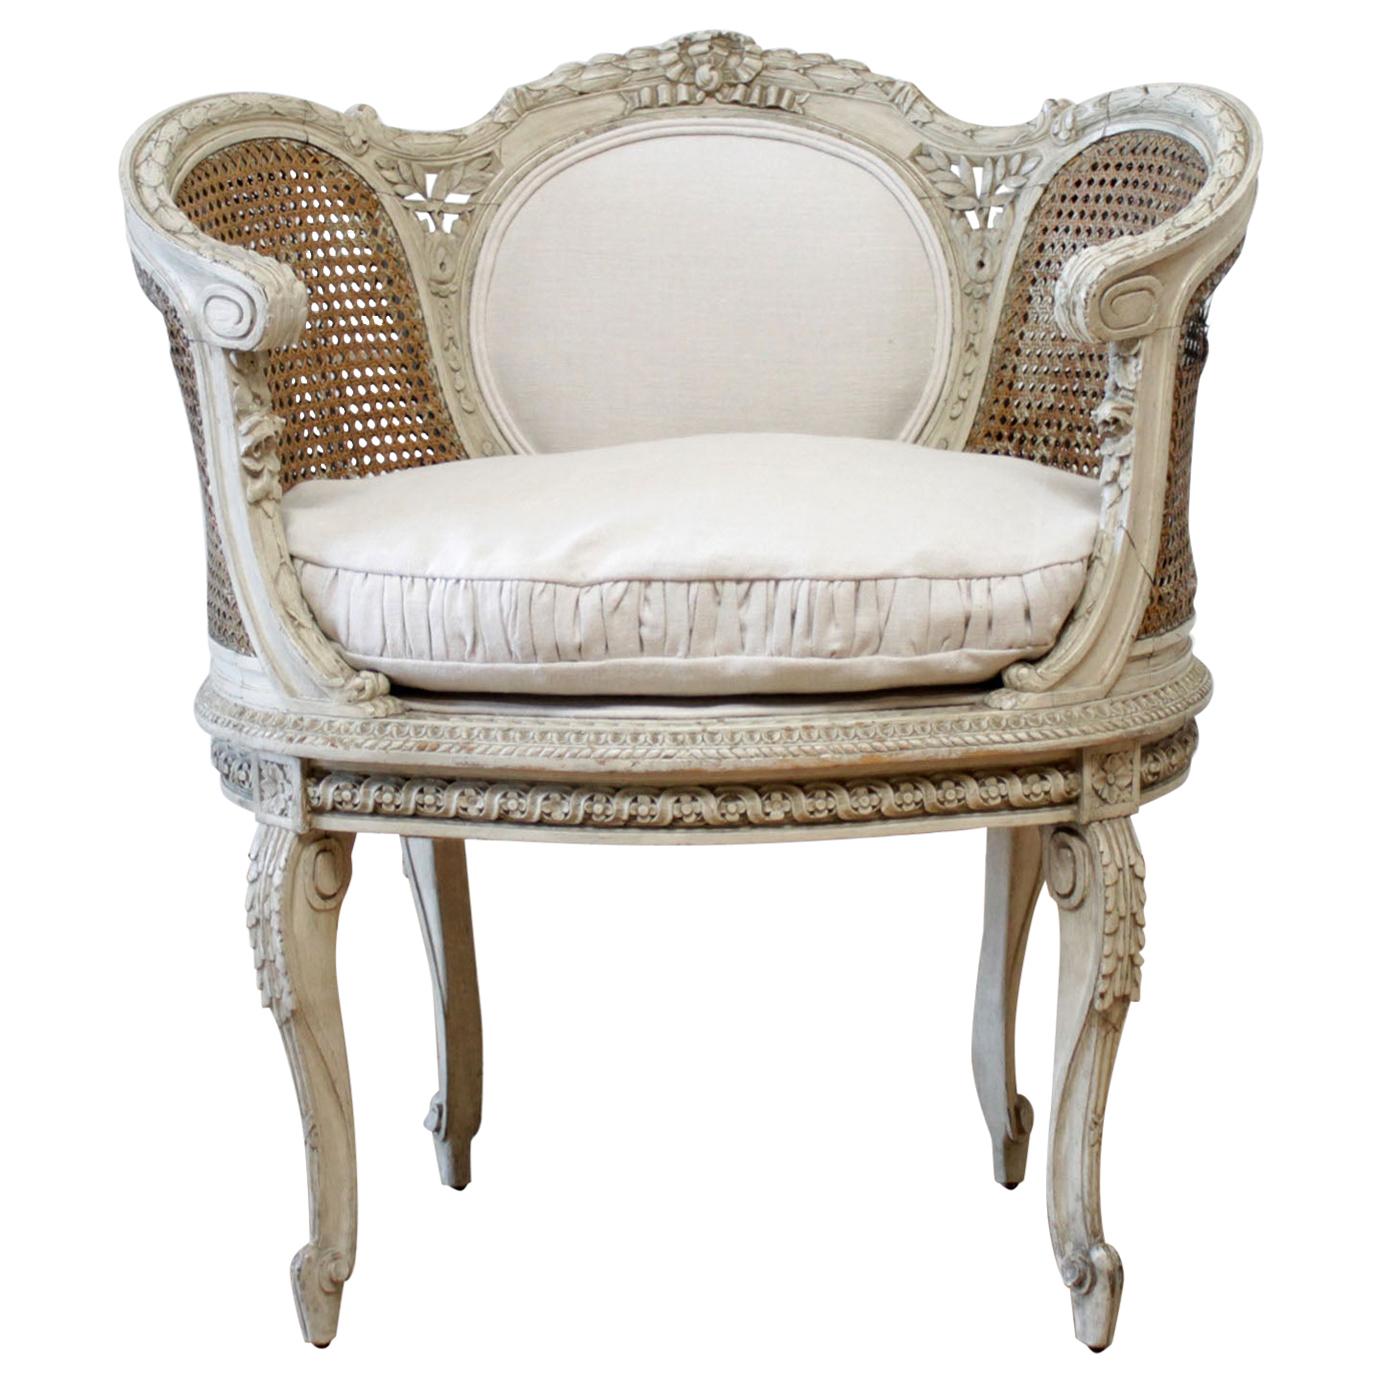 19th Century Painted French Cane Chair with Linen Slip Cover Cushion